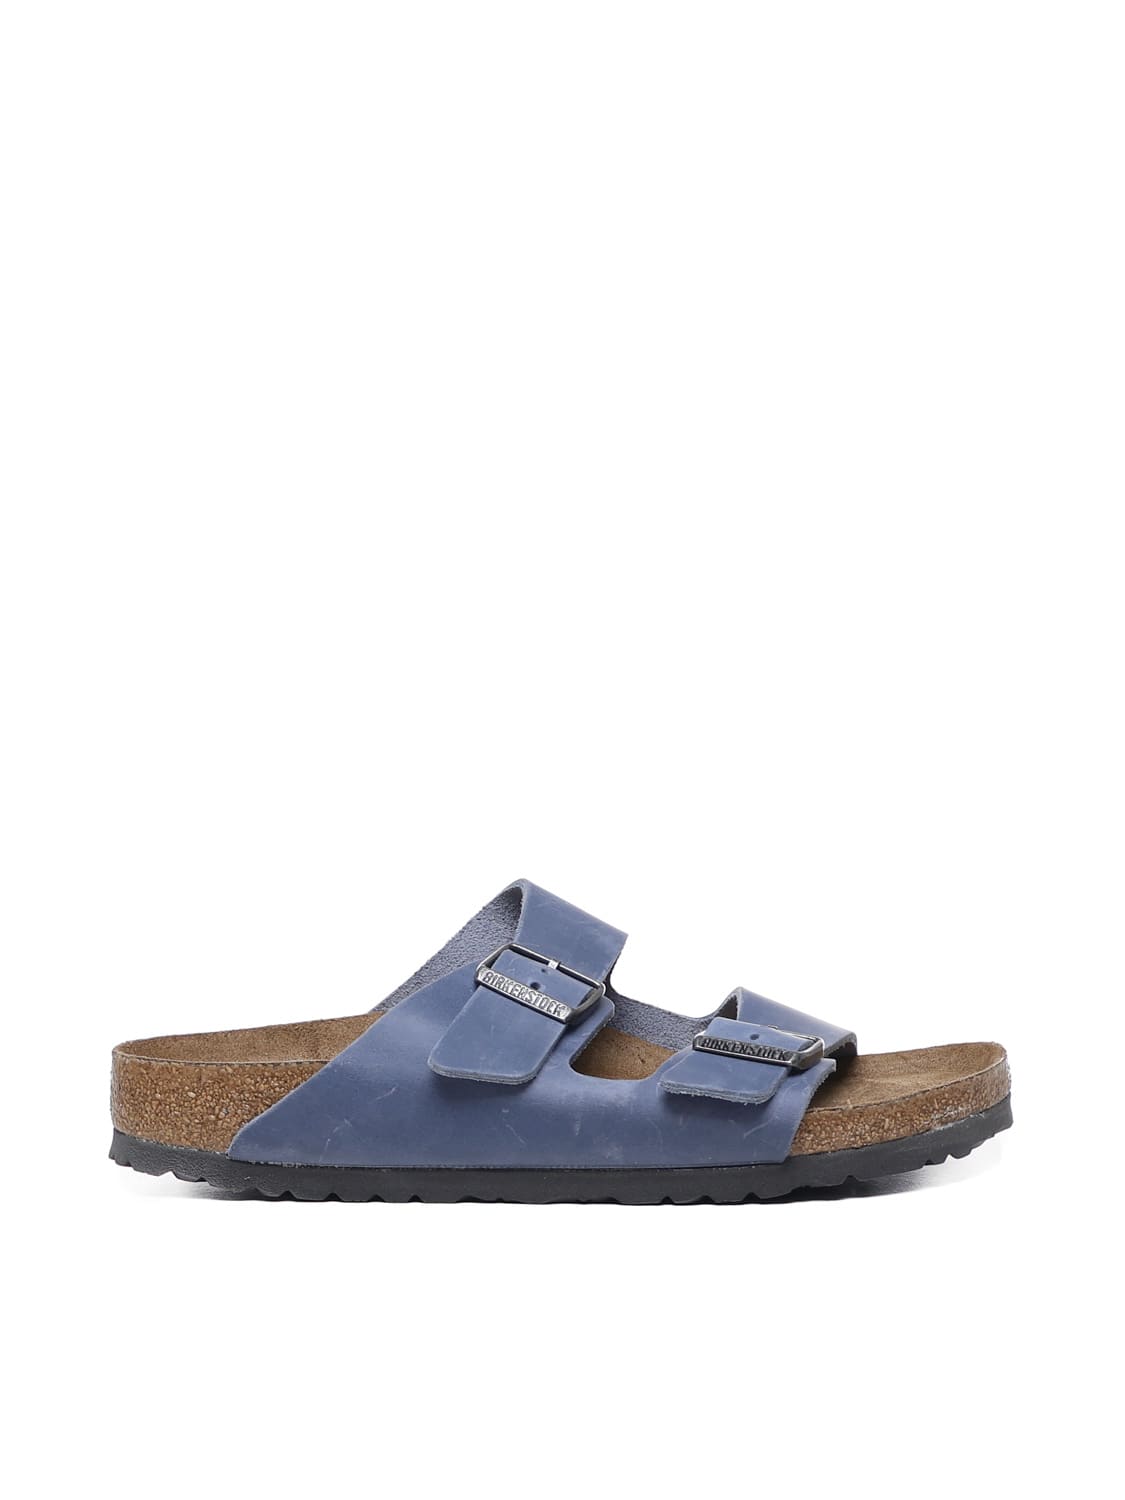 Ariziona Sandals With Dusty Blue Metal Buckle